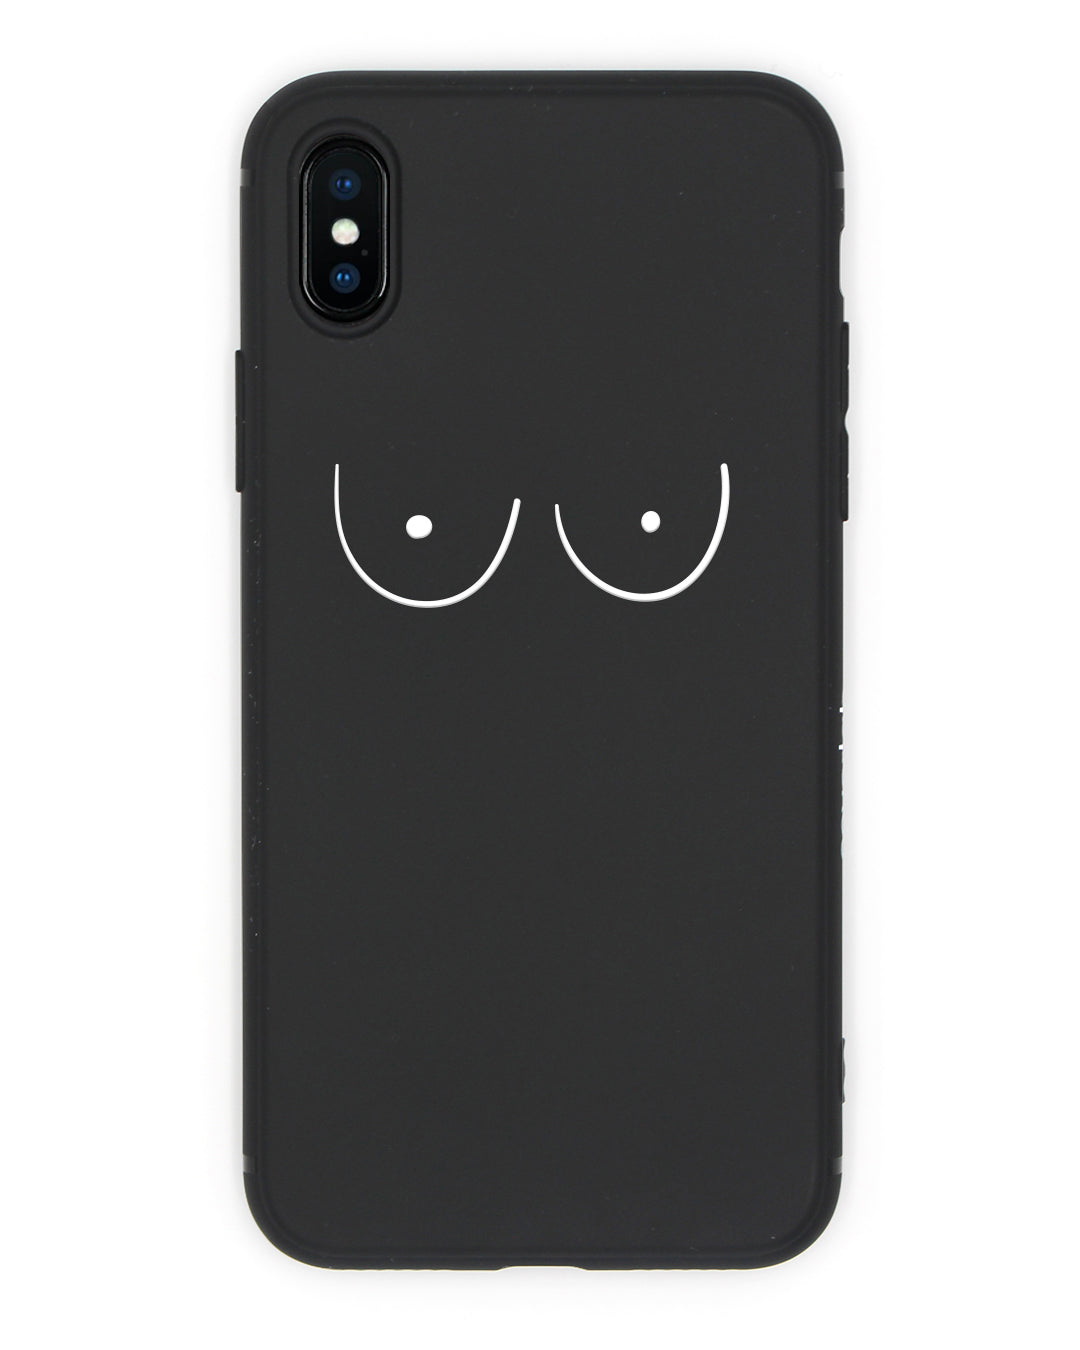 Tits iPhone Case - Coverlab